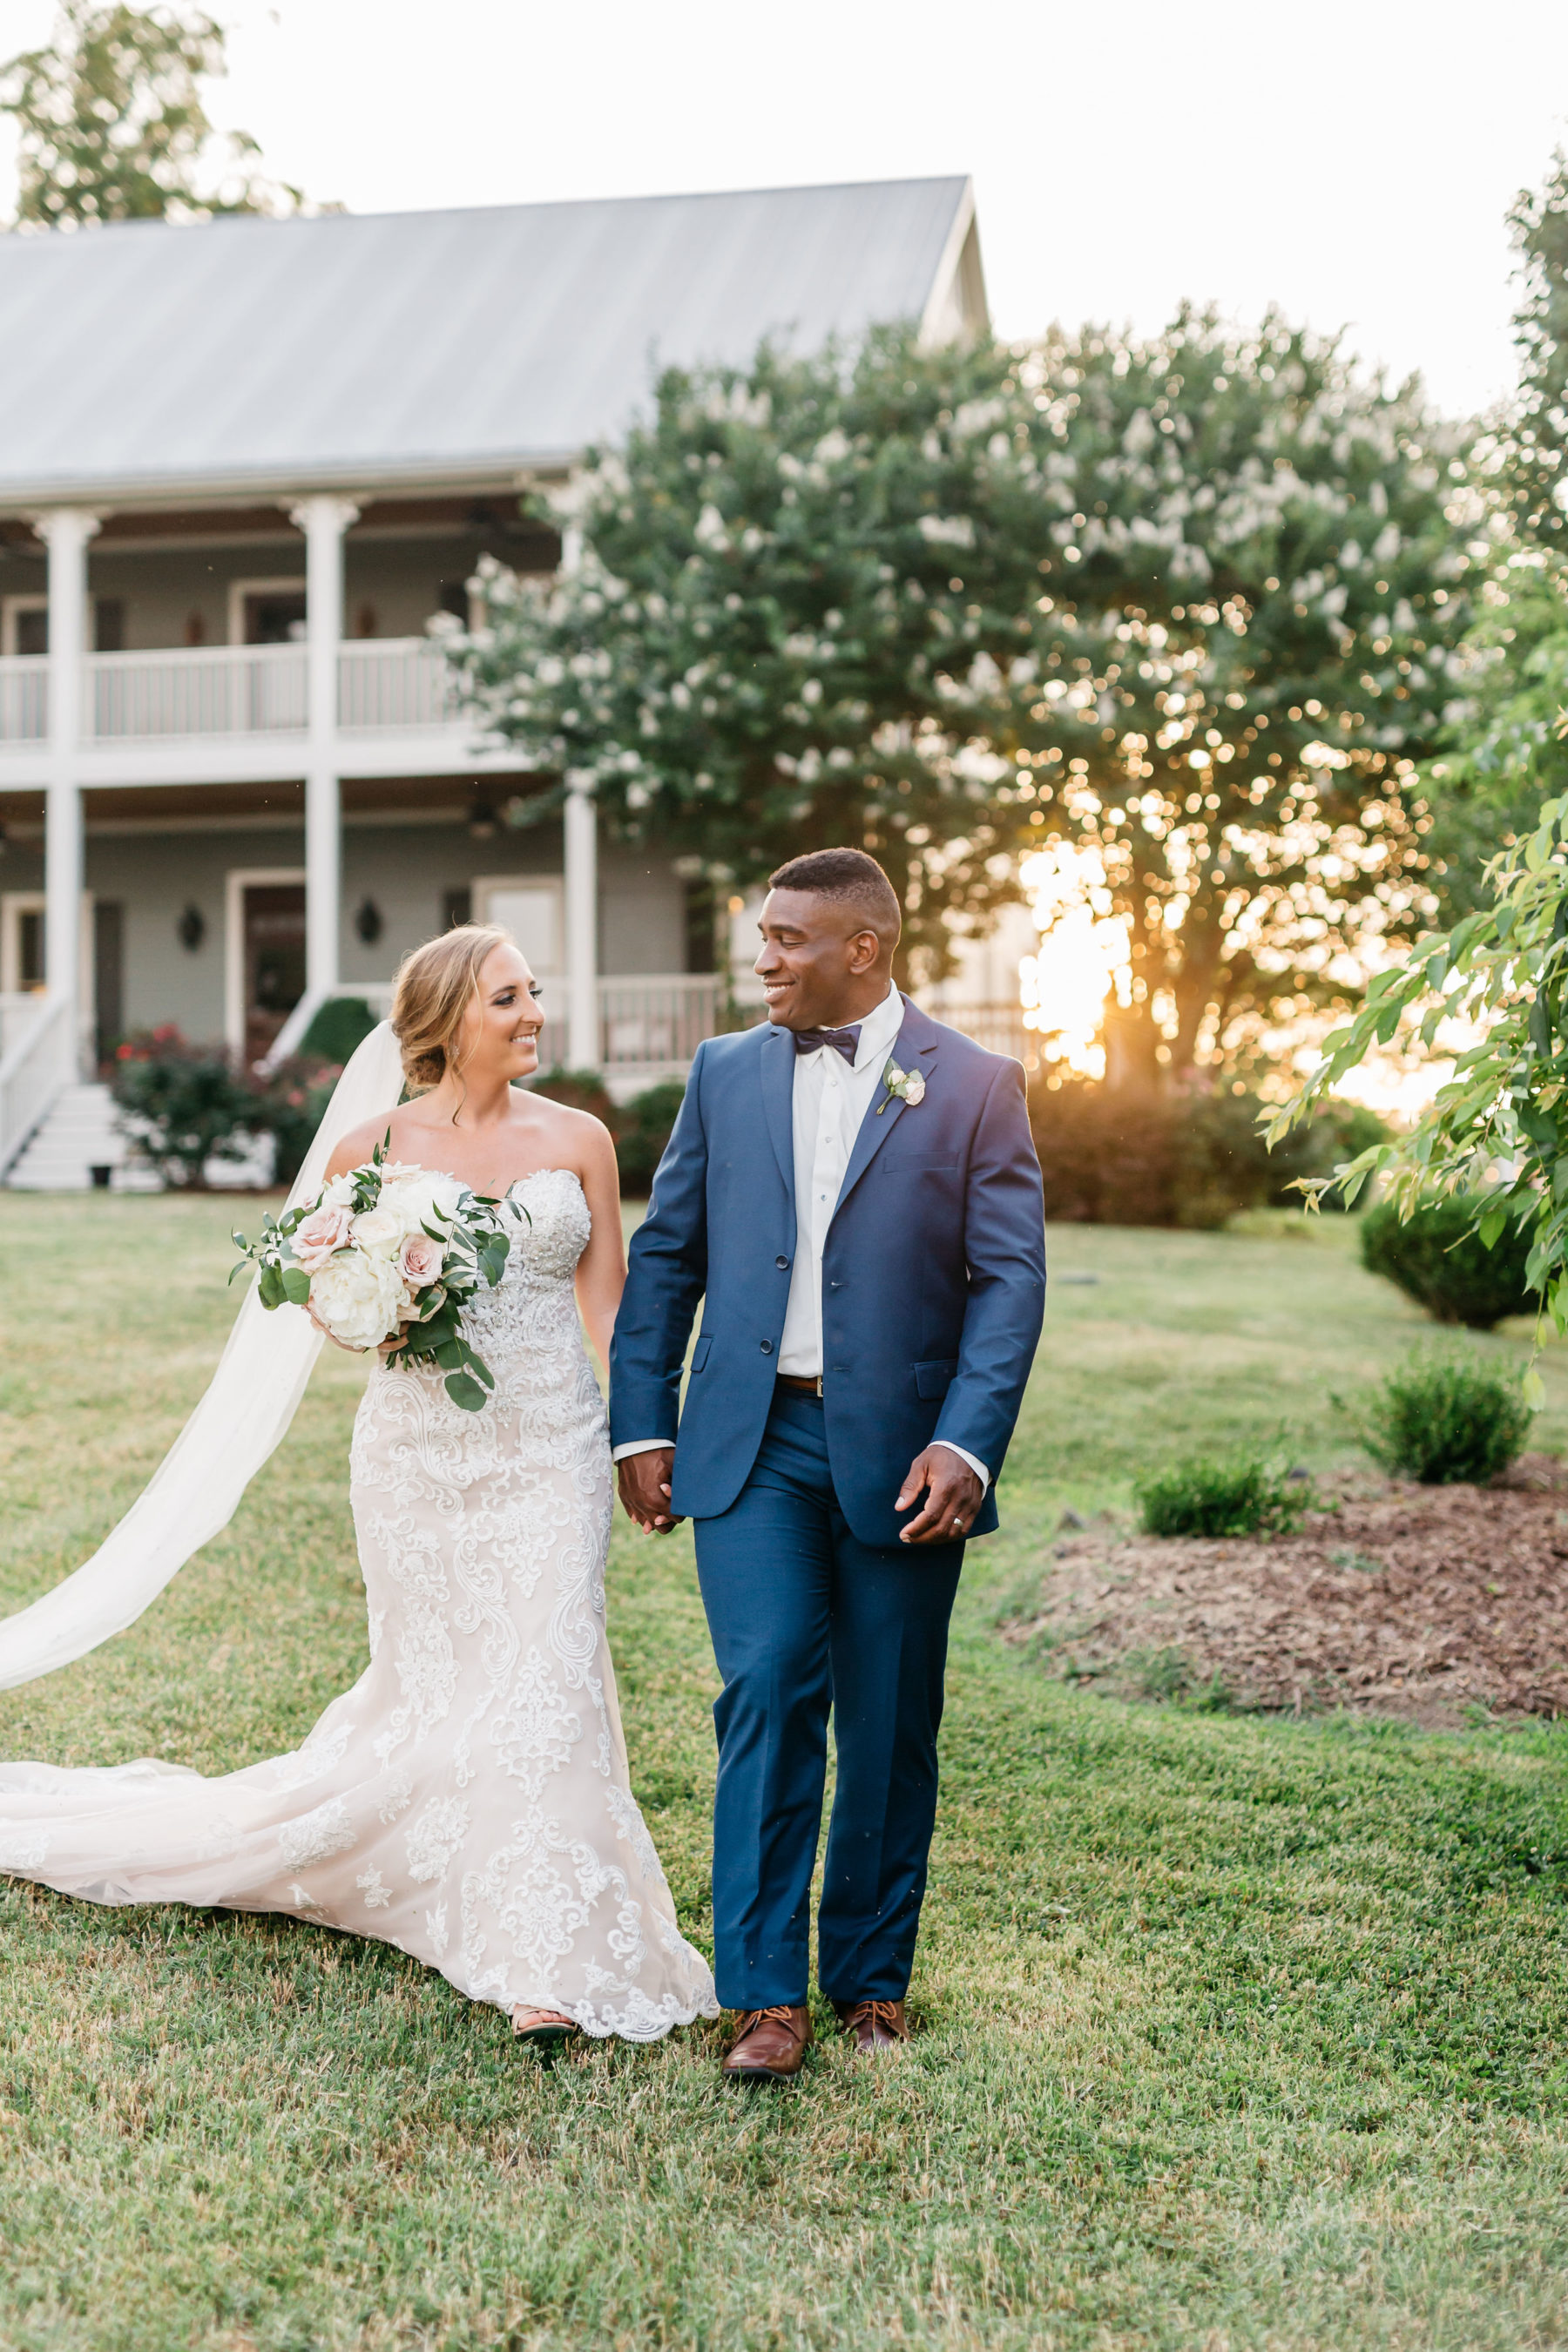 Rustic Front Porch Farms wedding featured on Nashville Bride Guide